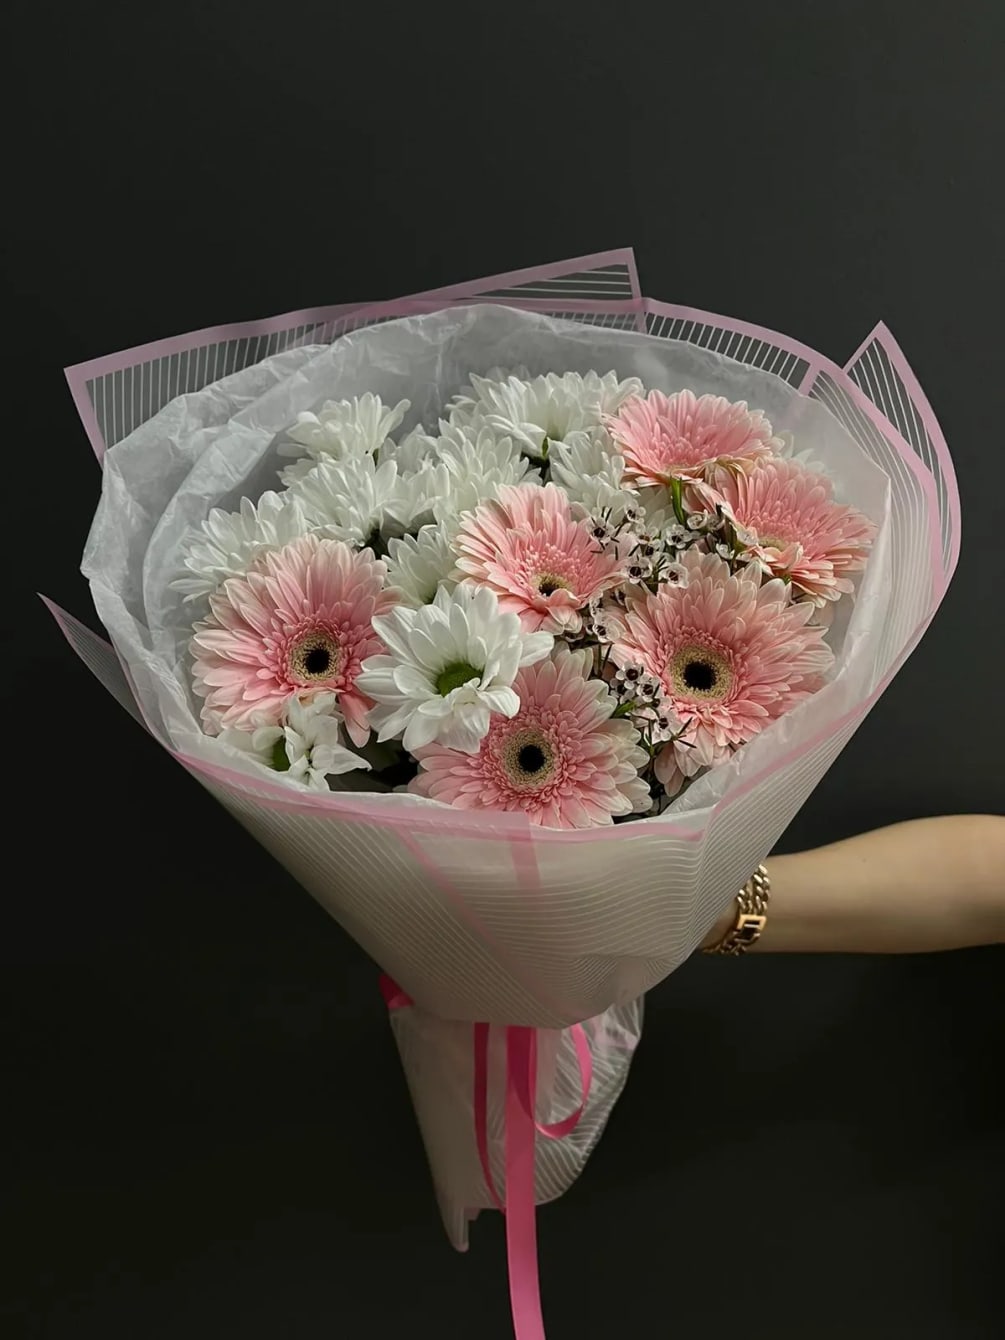 Bouquet will be delivered approximately as picture